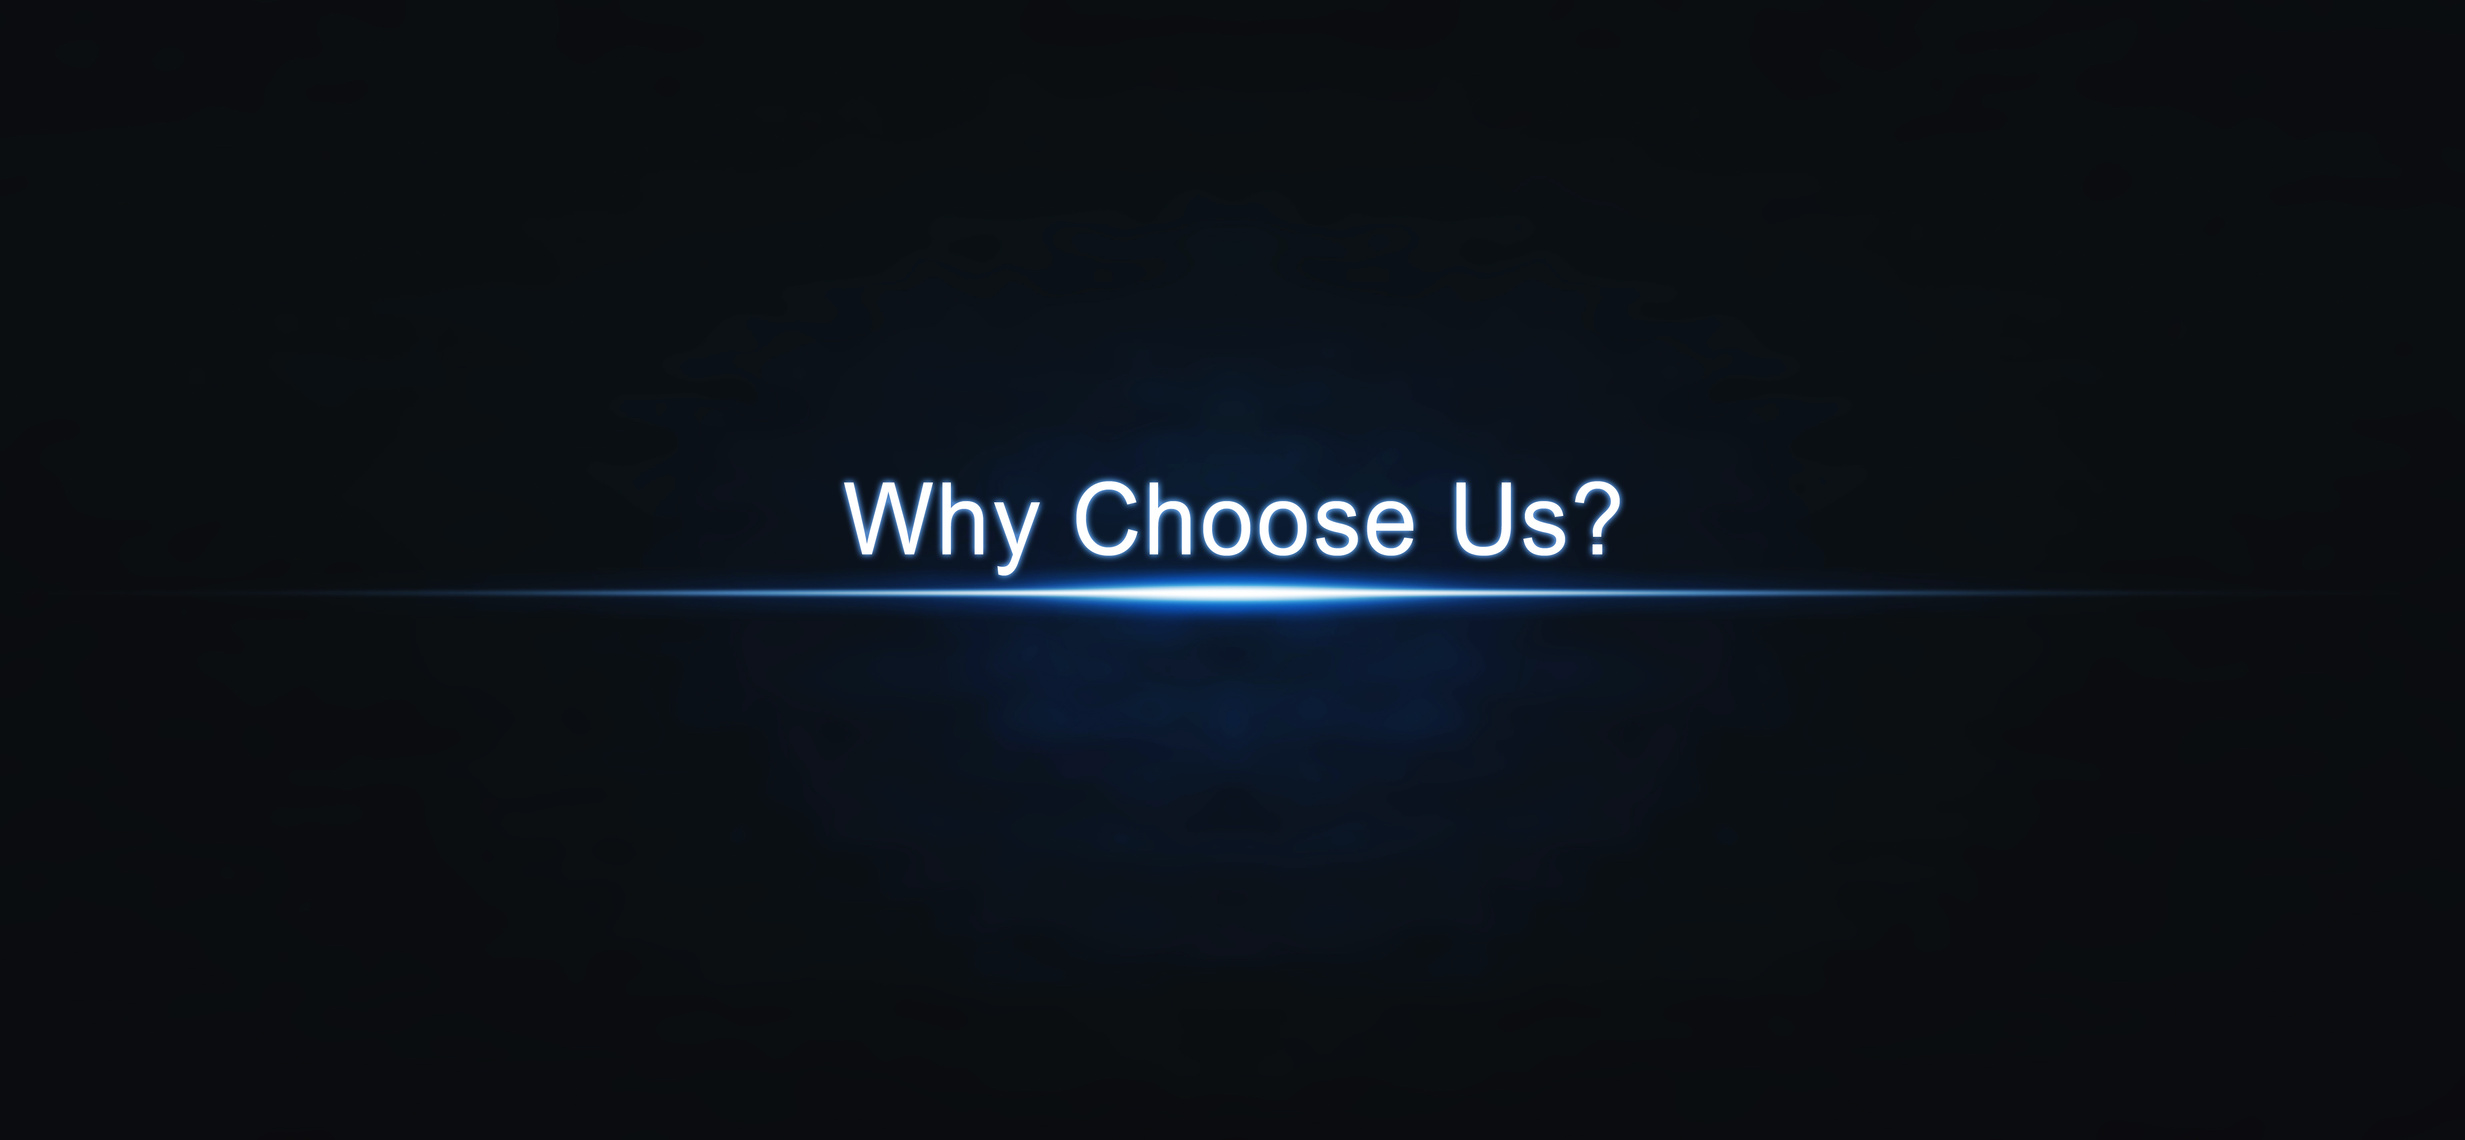 Why Choose Us on blue light background.